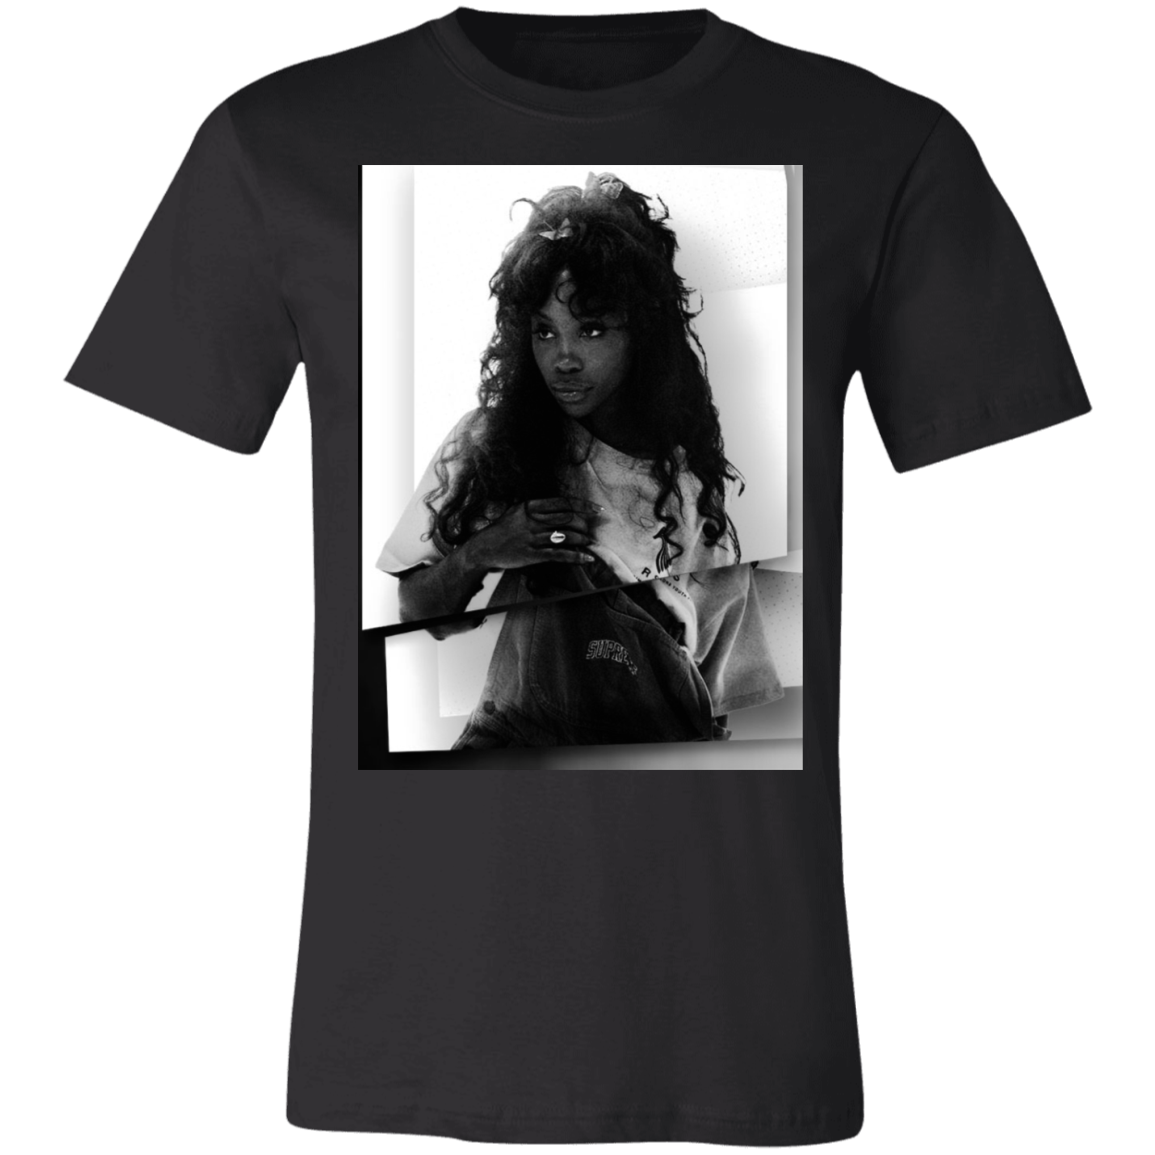 sza graphic tee in black